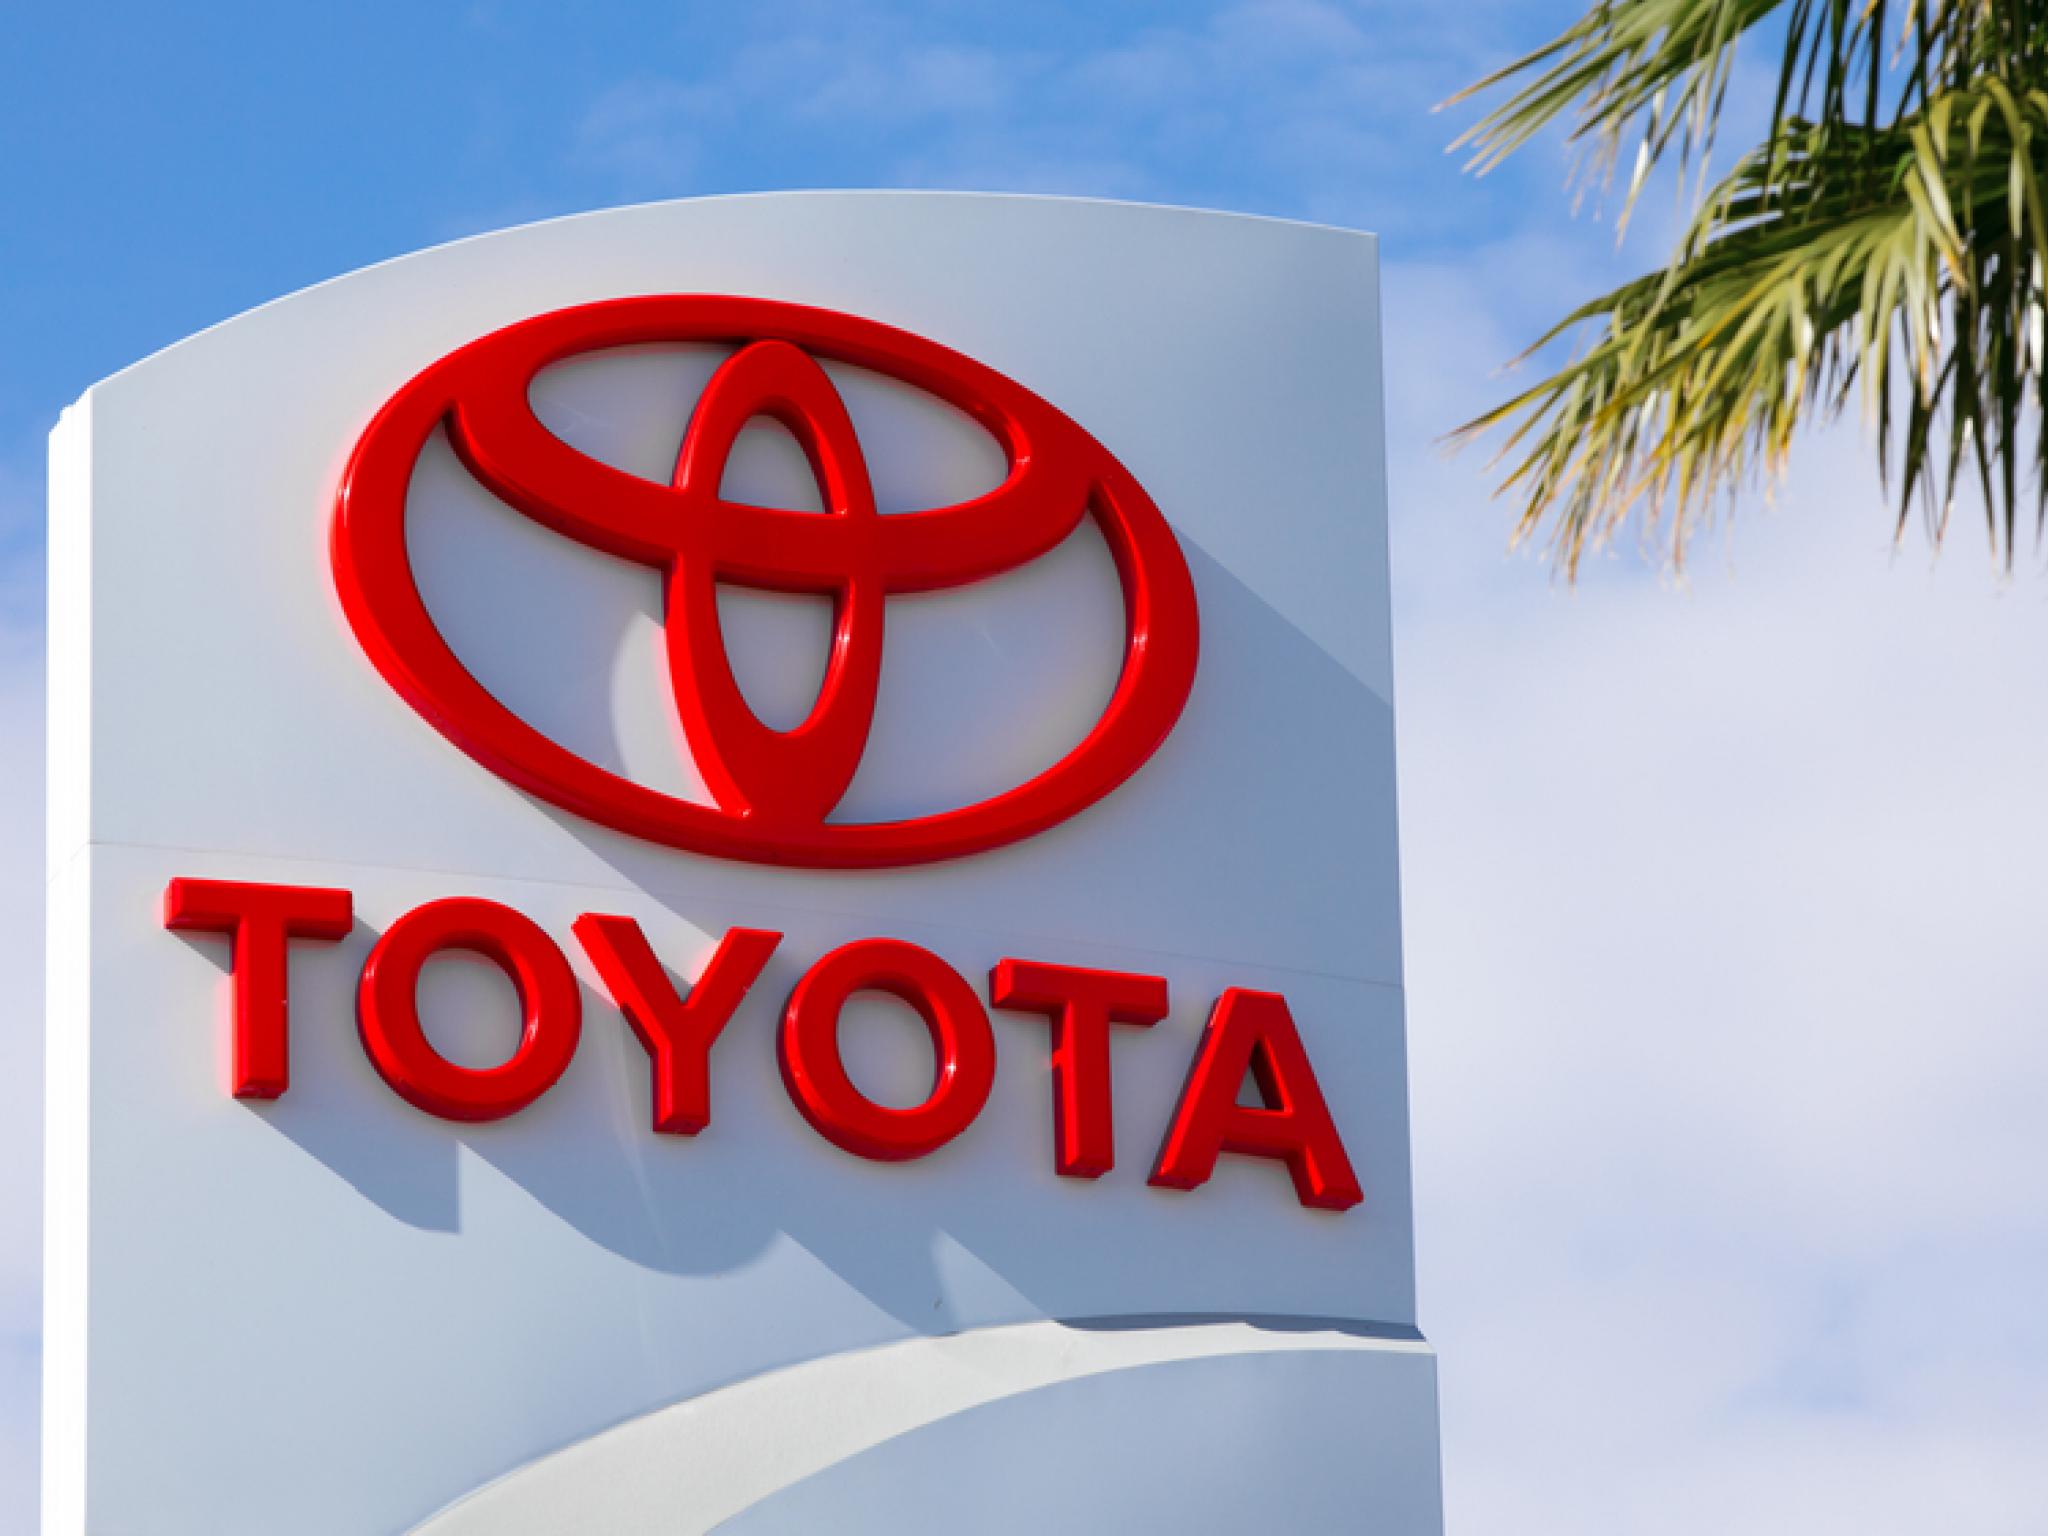  japanese-automakers-toyota-nissan-partner-with-tencent-baidu-to-boost-ai-capabilities-in-china 